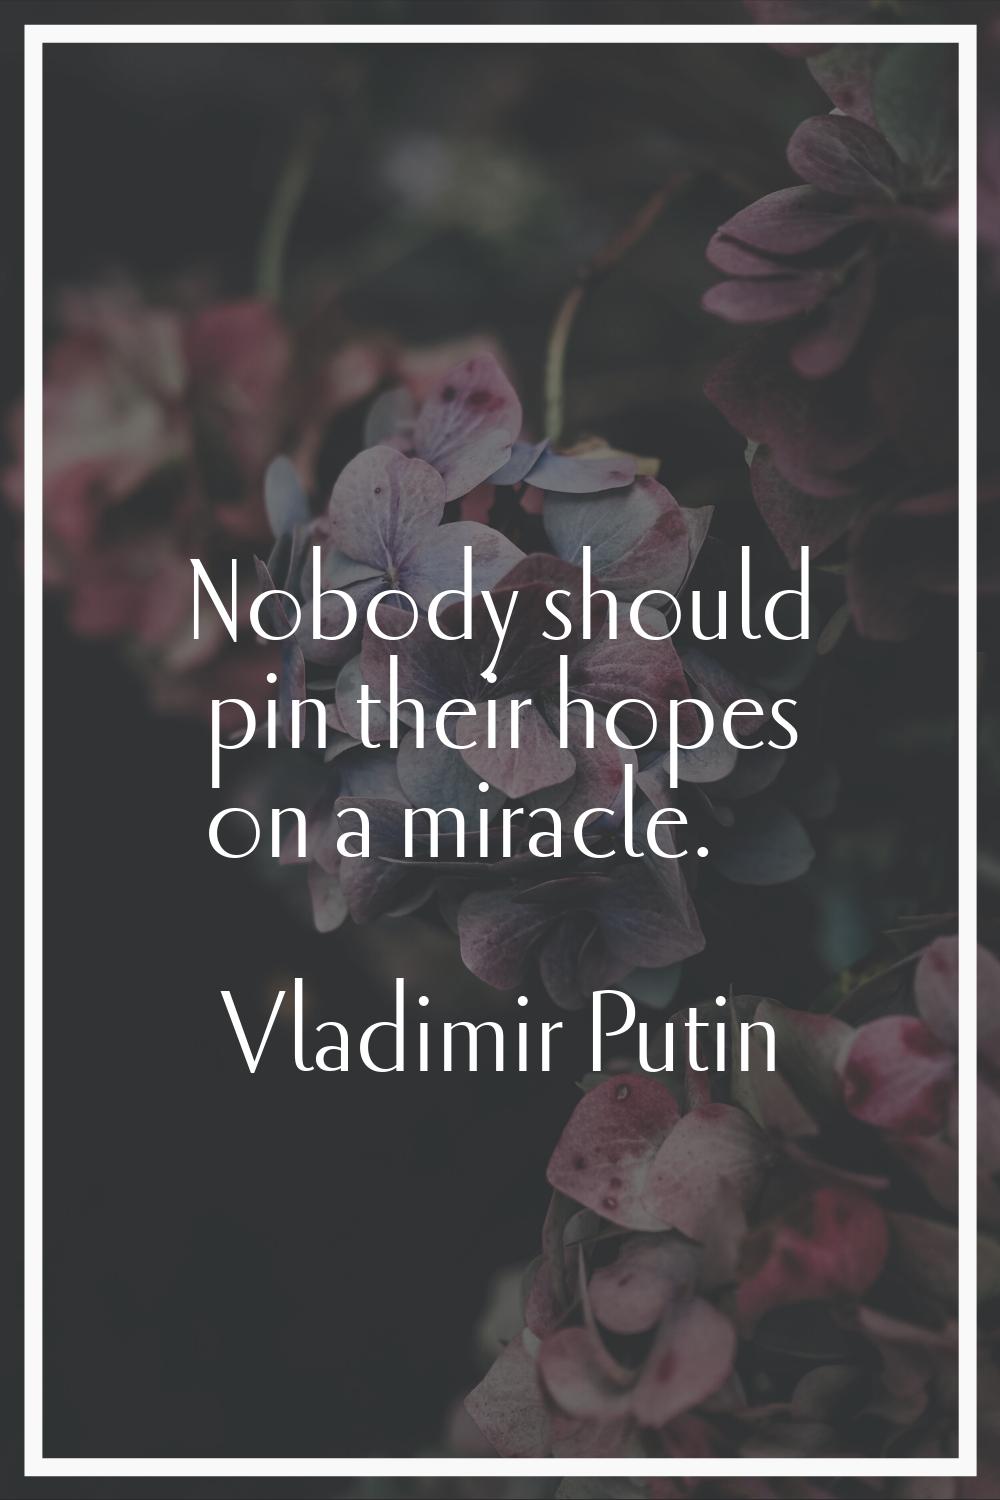 Nobody should pin their hopes on a miracle.